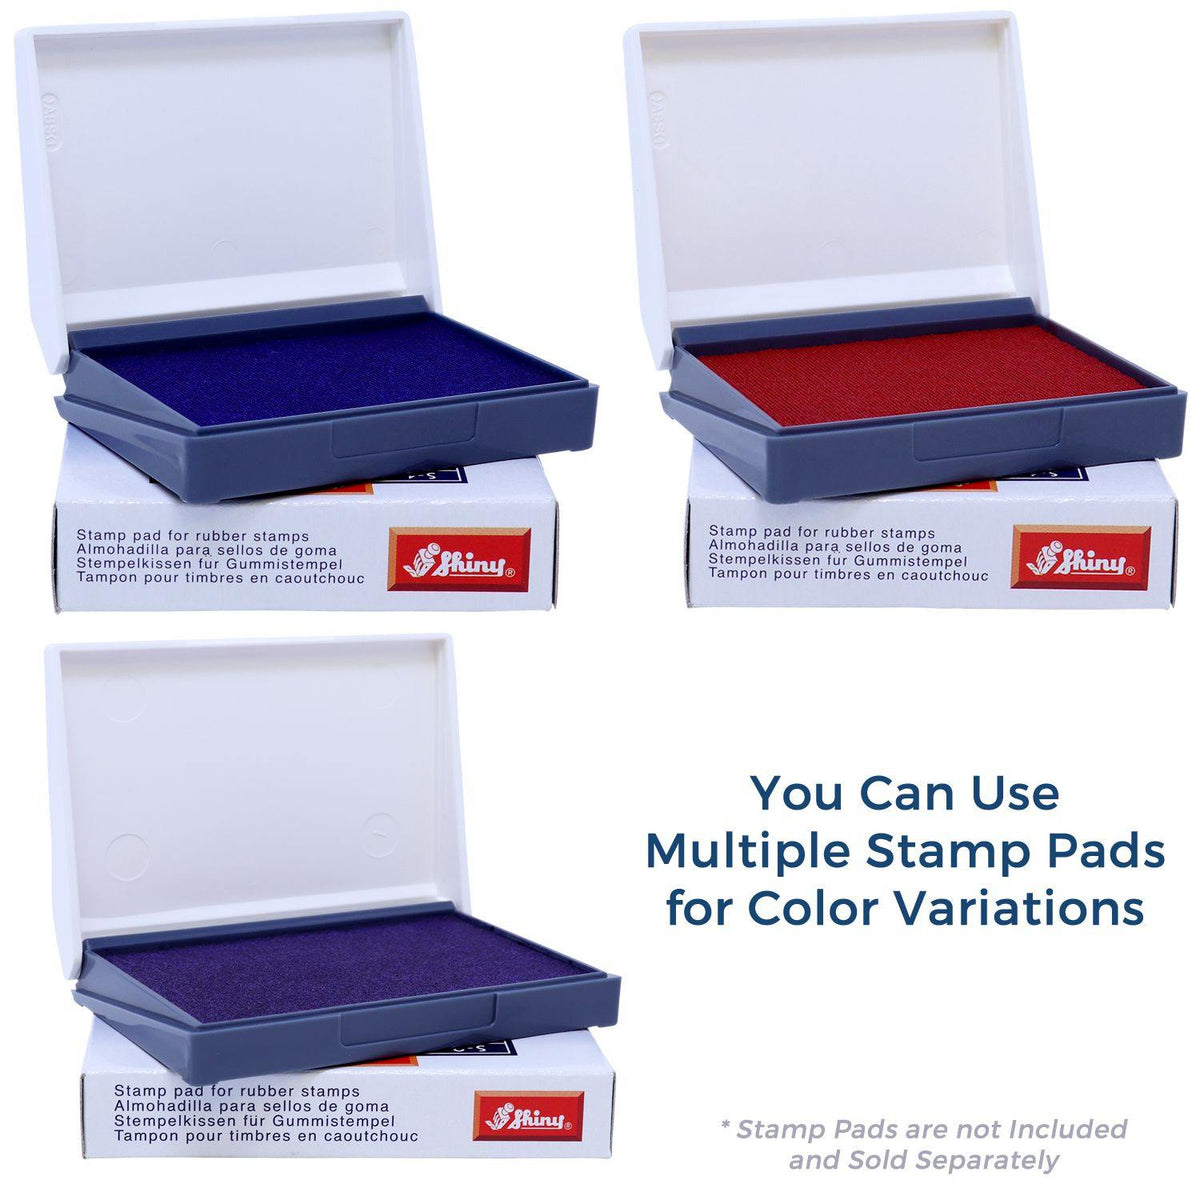 Stamp Pads for Large Plaintiffs Exhibit Rubber Stamp Available